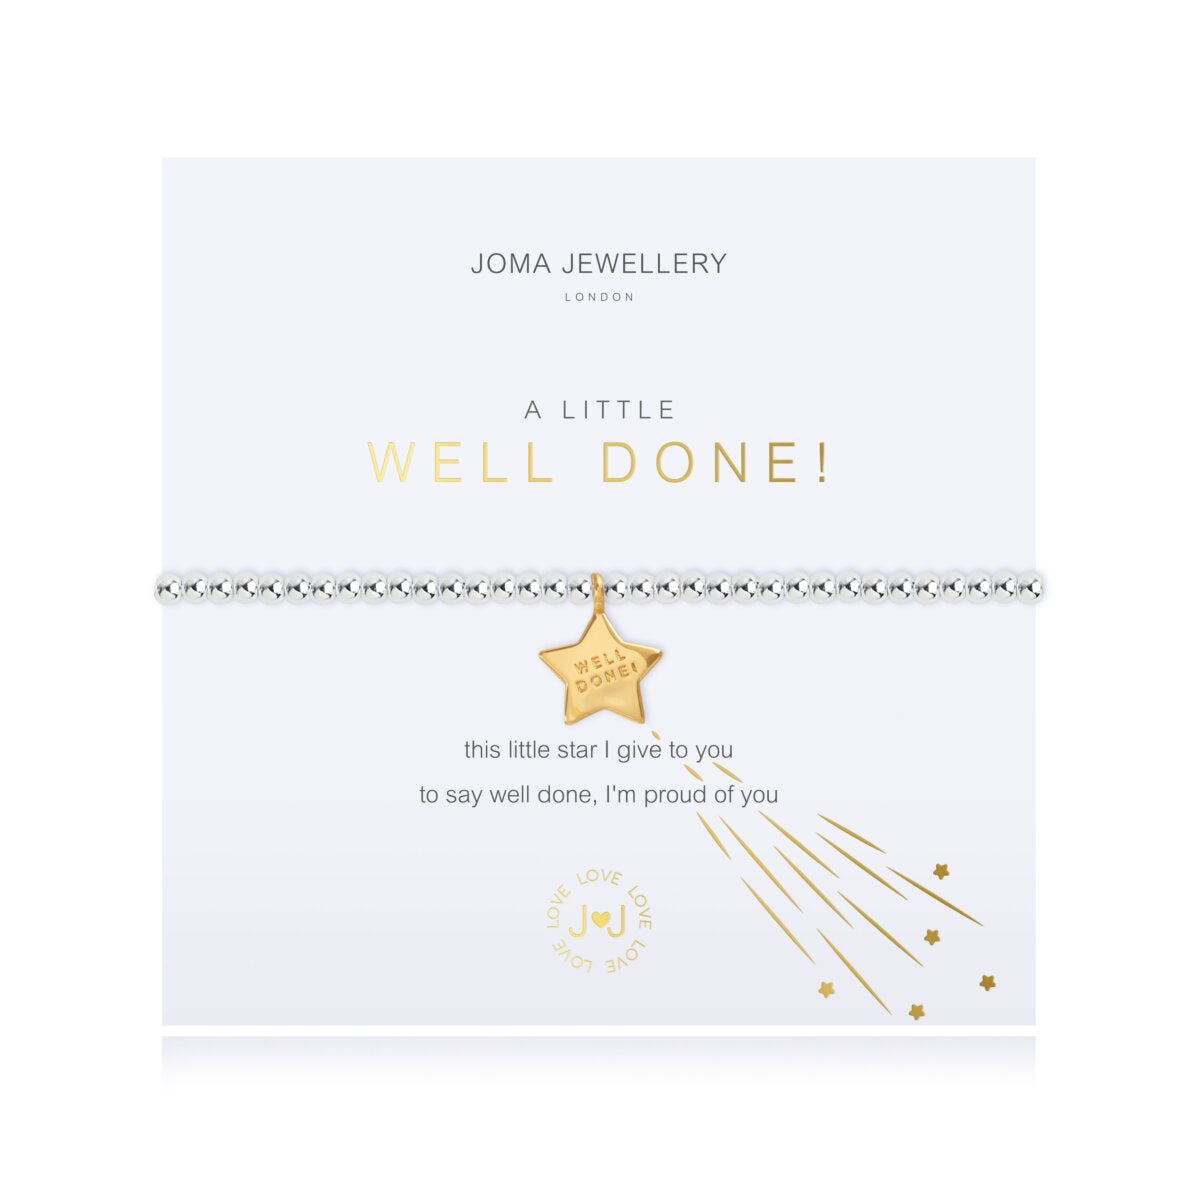 Joma Jewellery 'A Little' Well Done